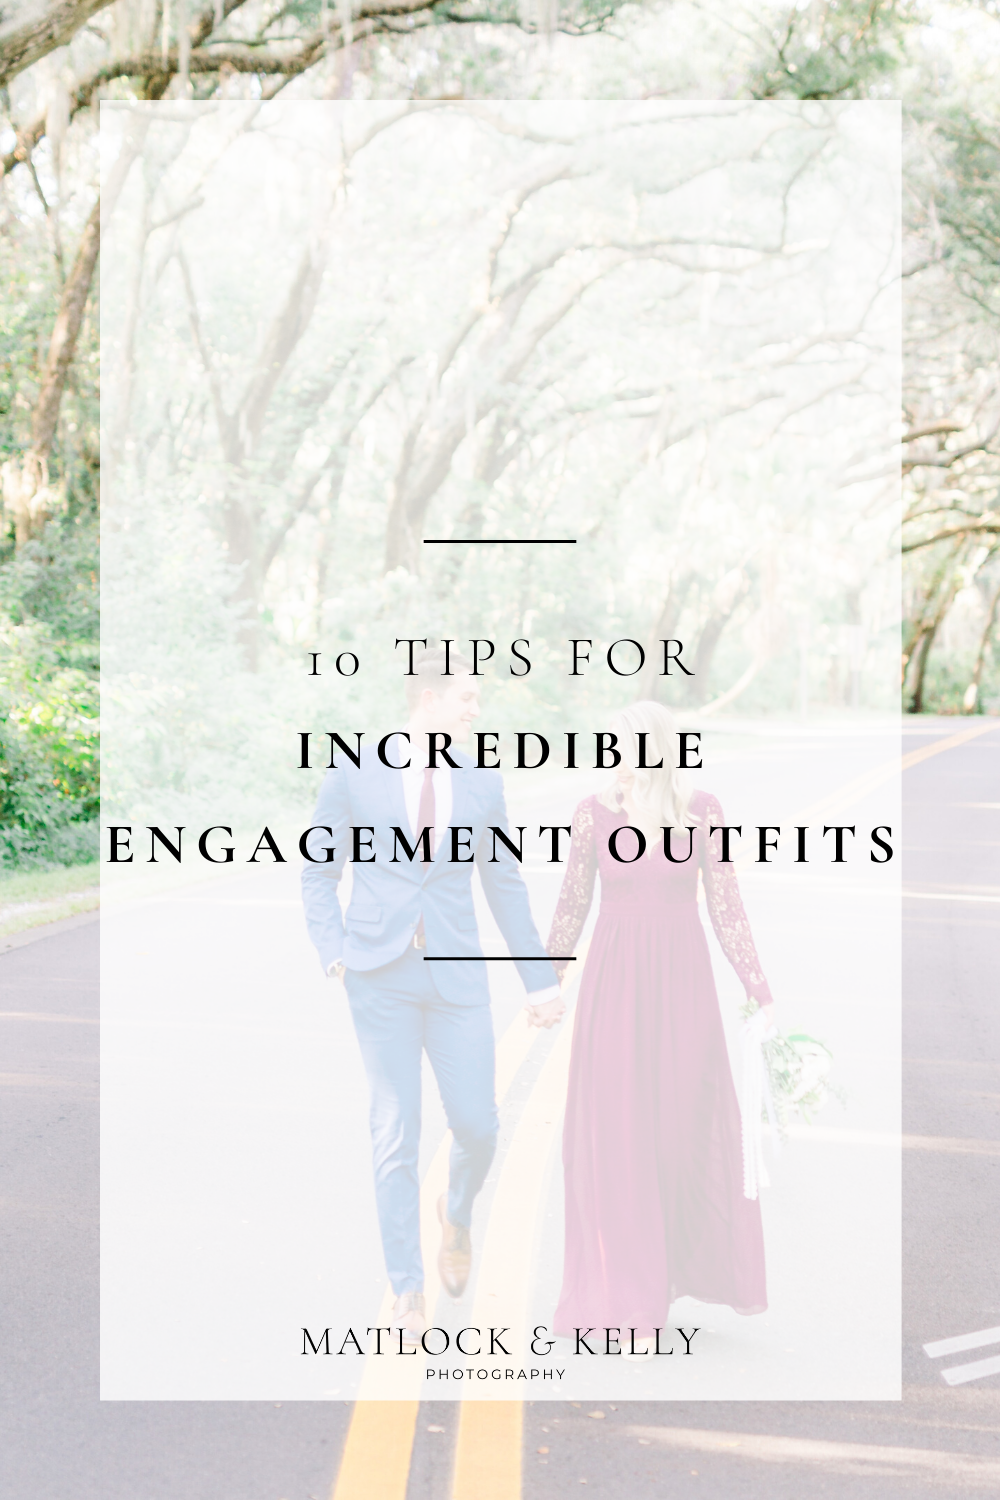 10 tips for incredible engagement outfits!